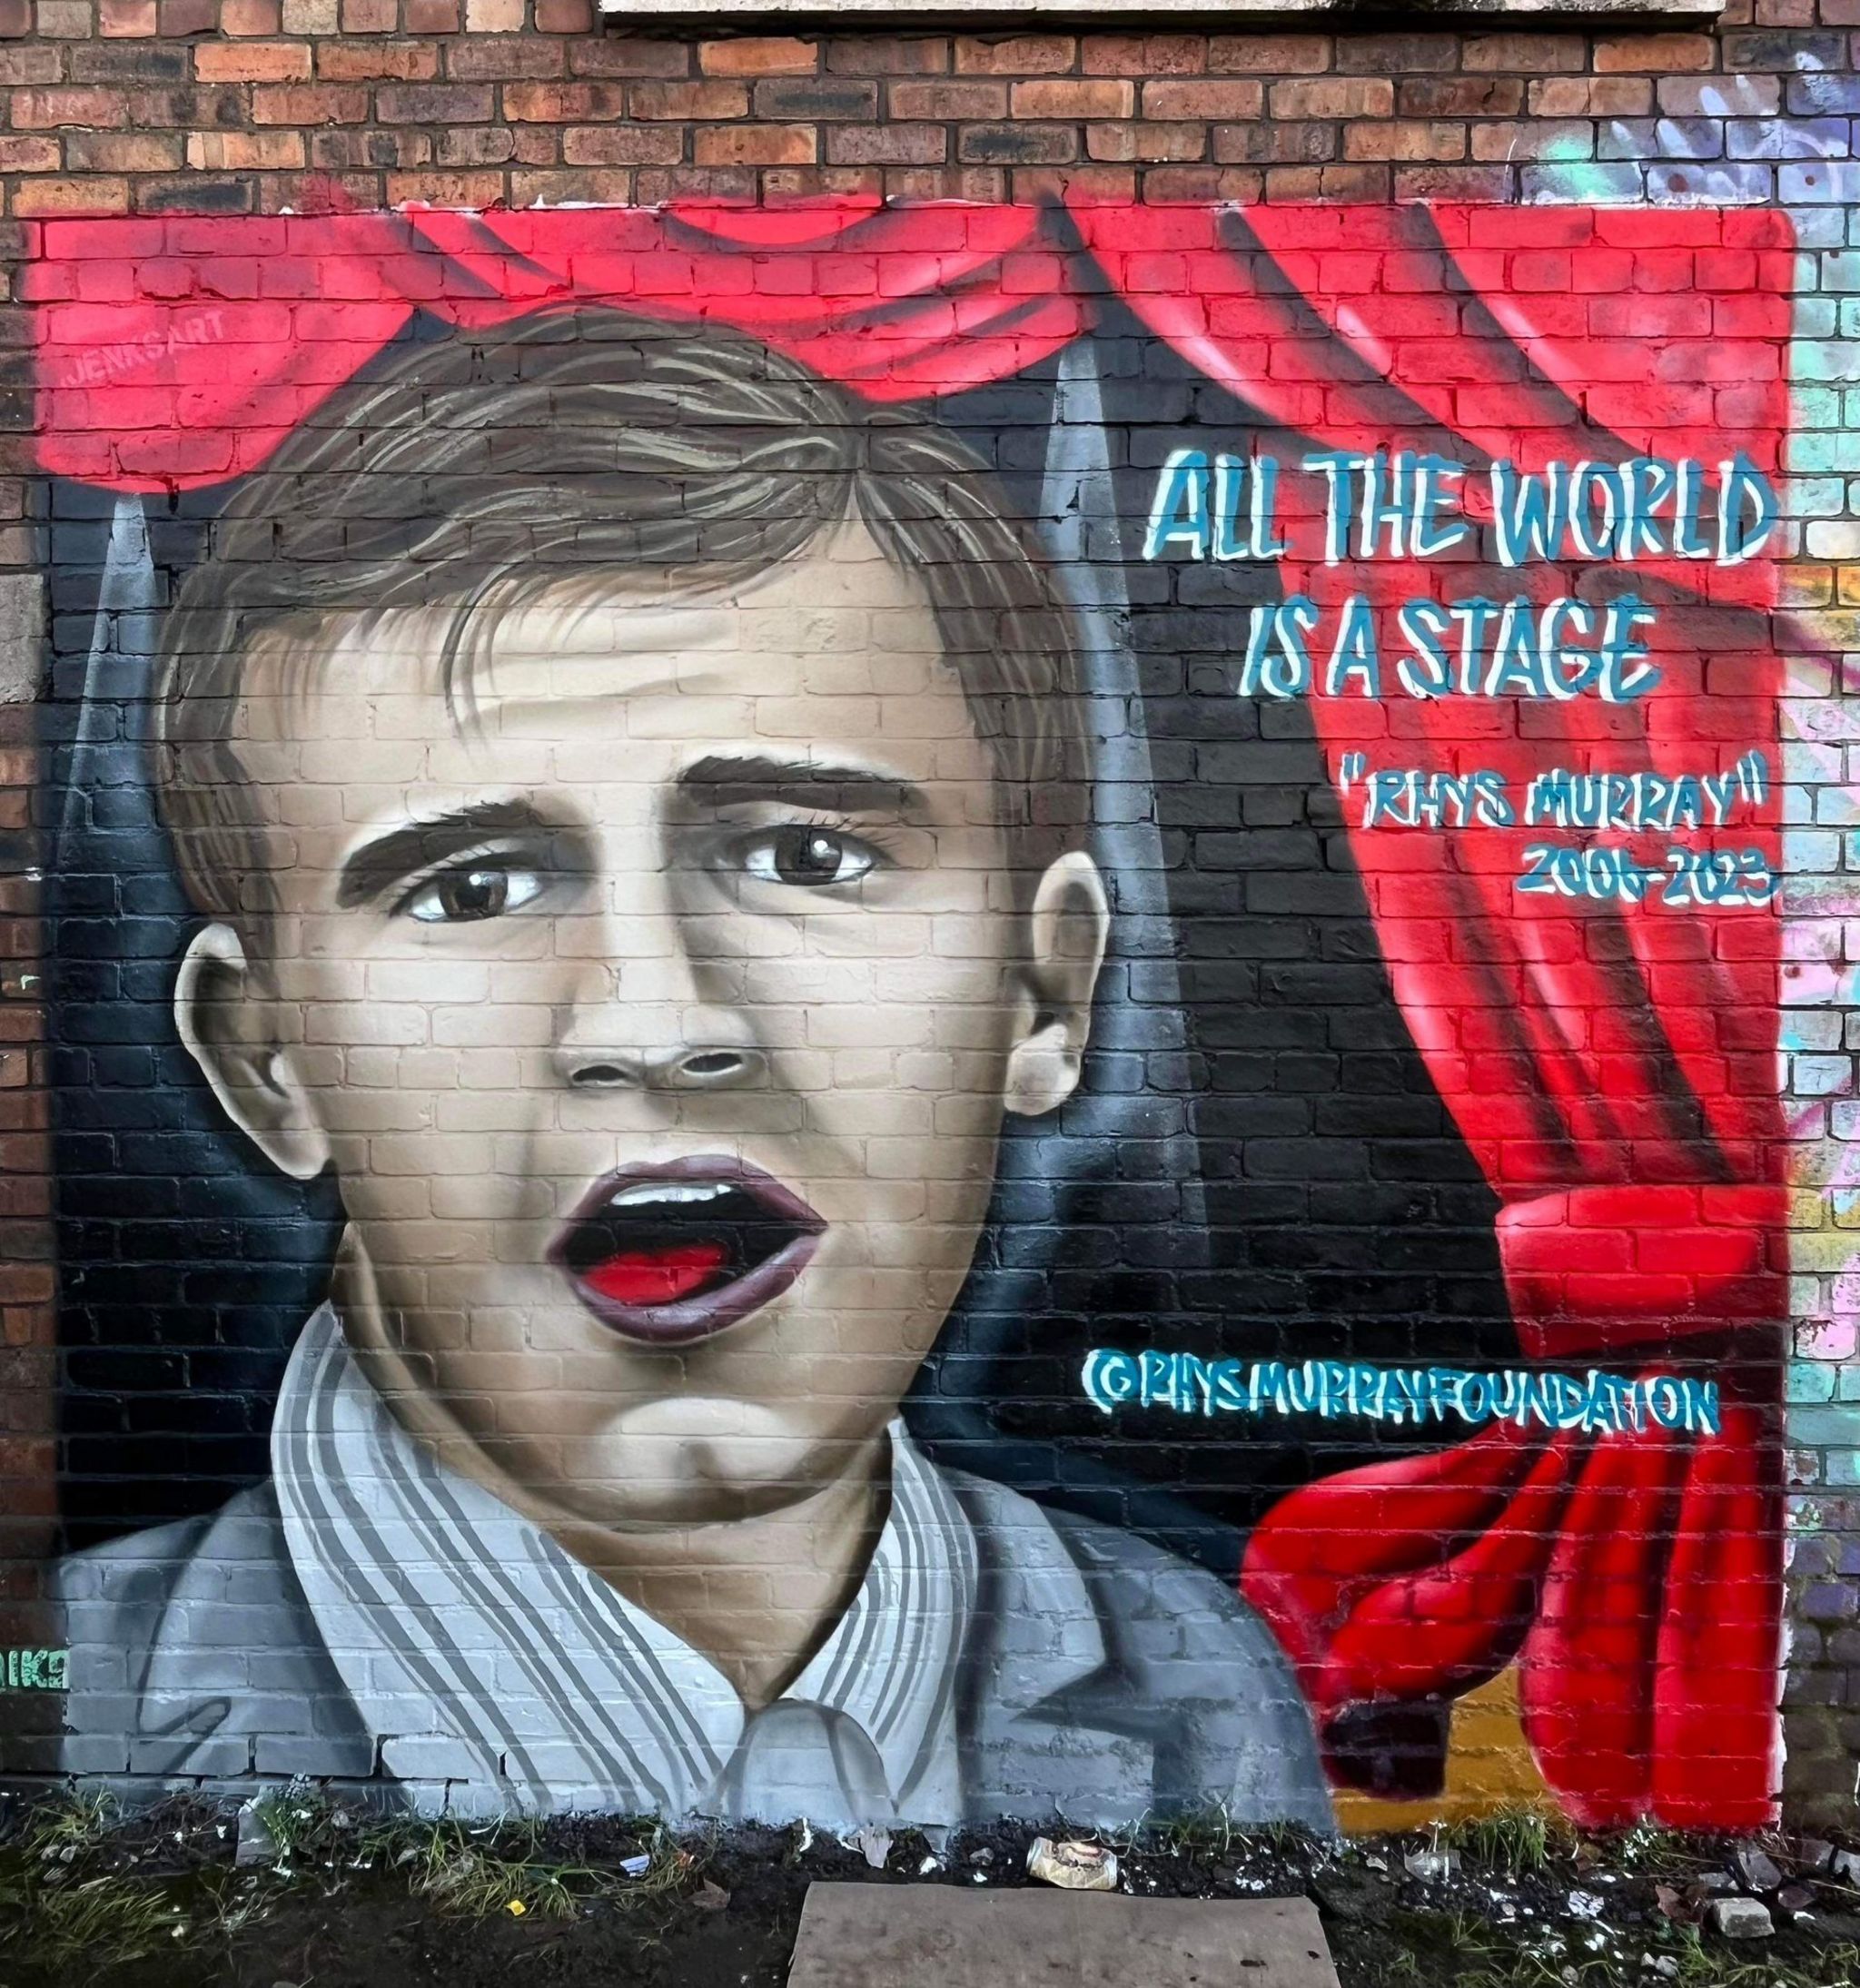 A mural in tribute to Rhys 